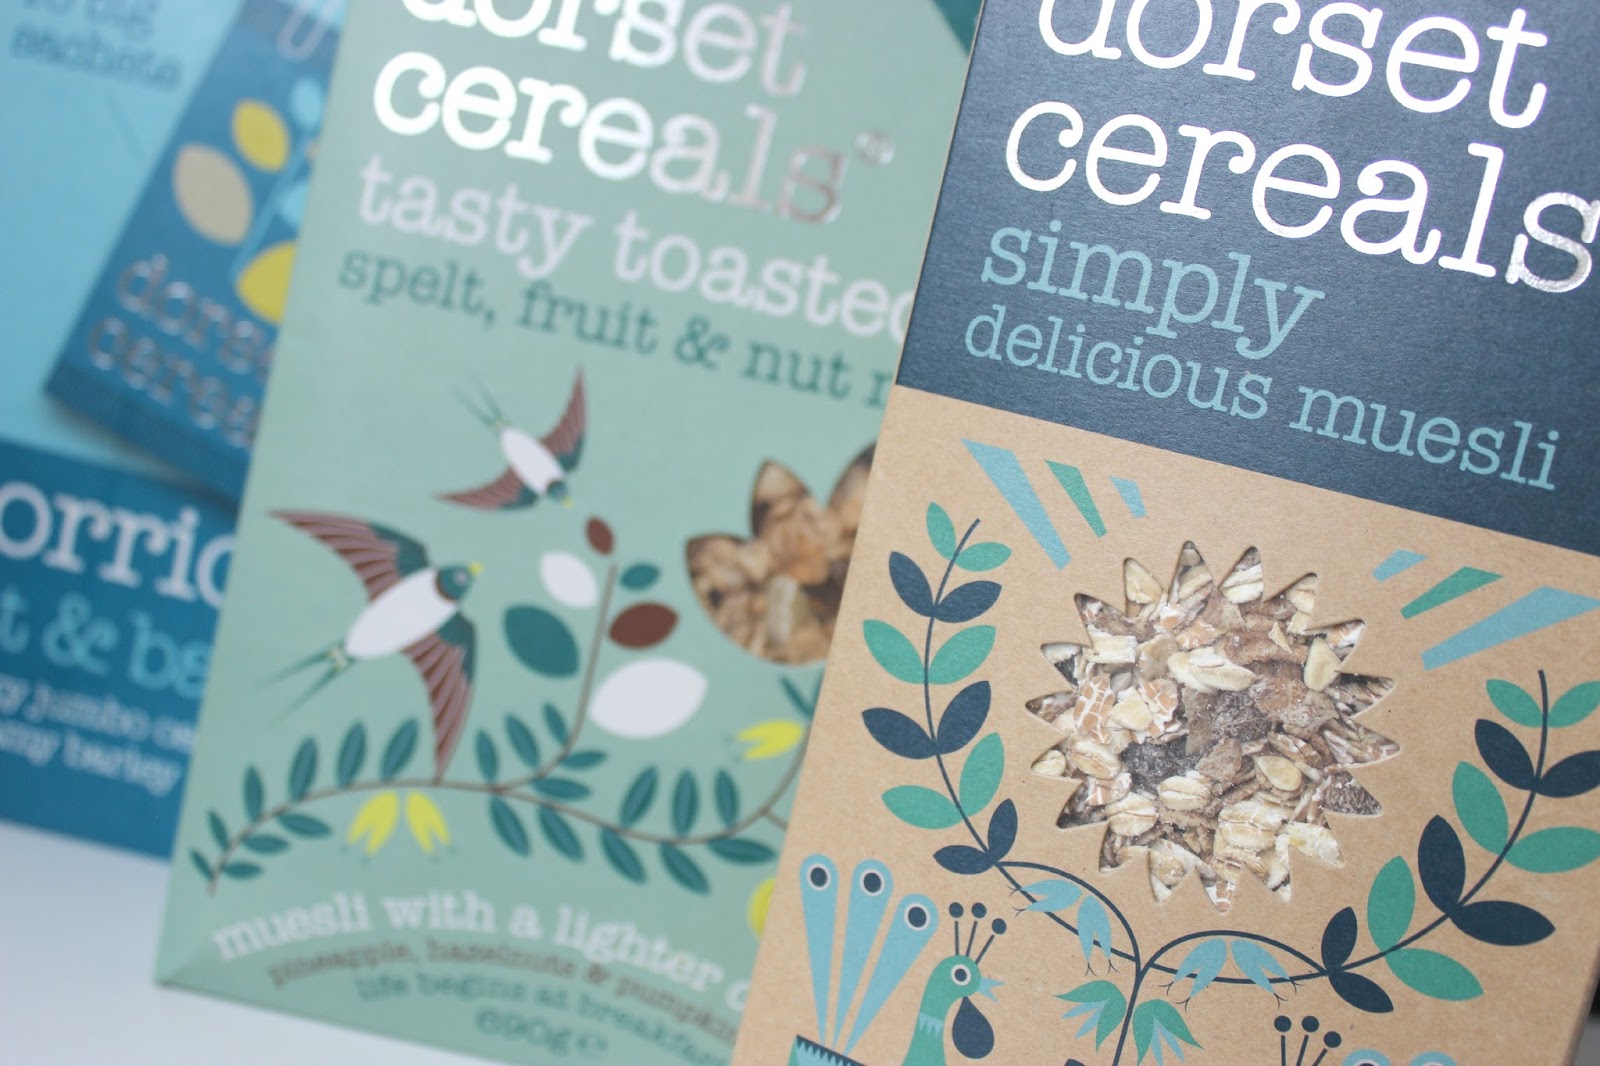 A picture of Dorset Cereals Simply Delicious Muesli